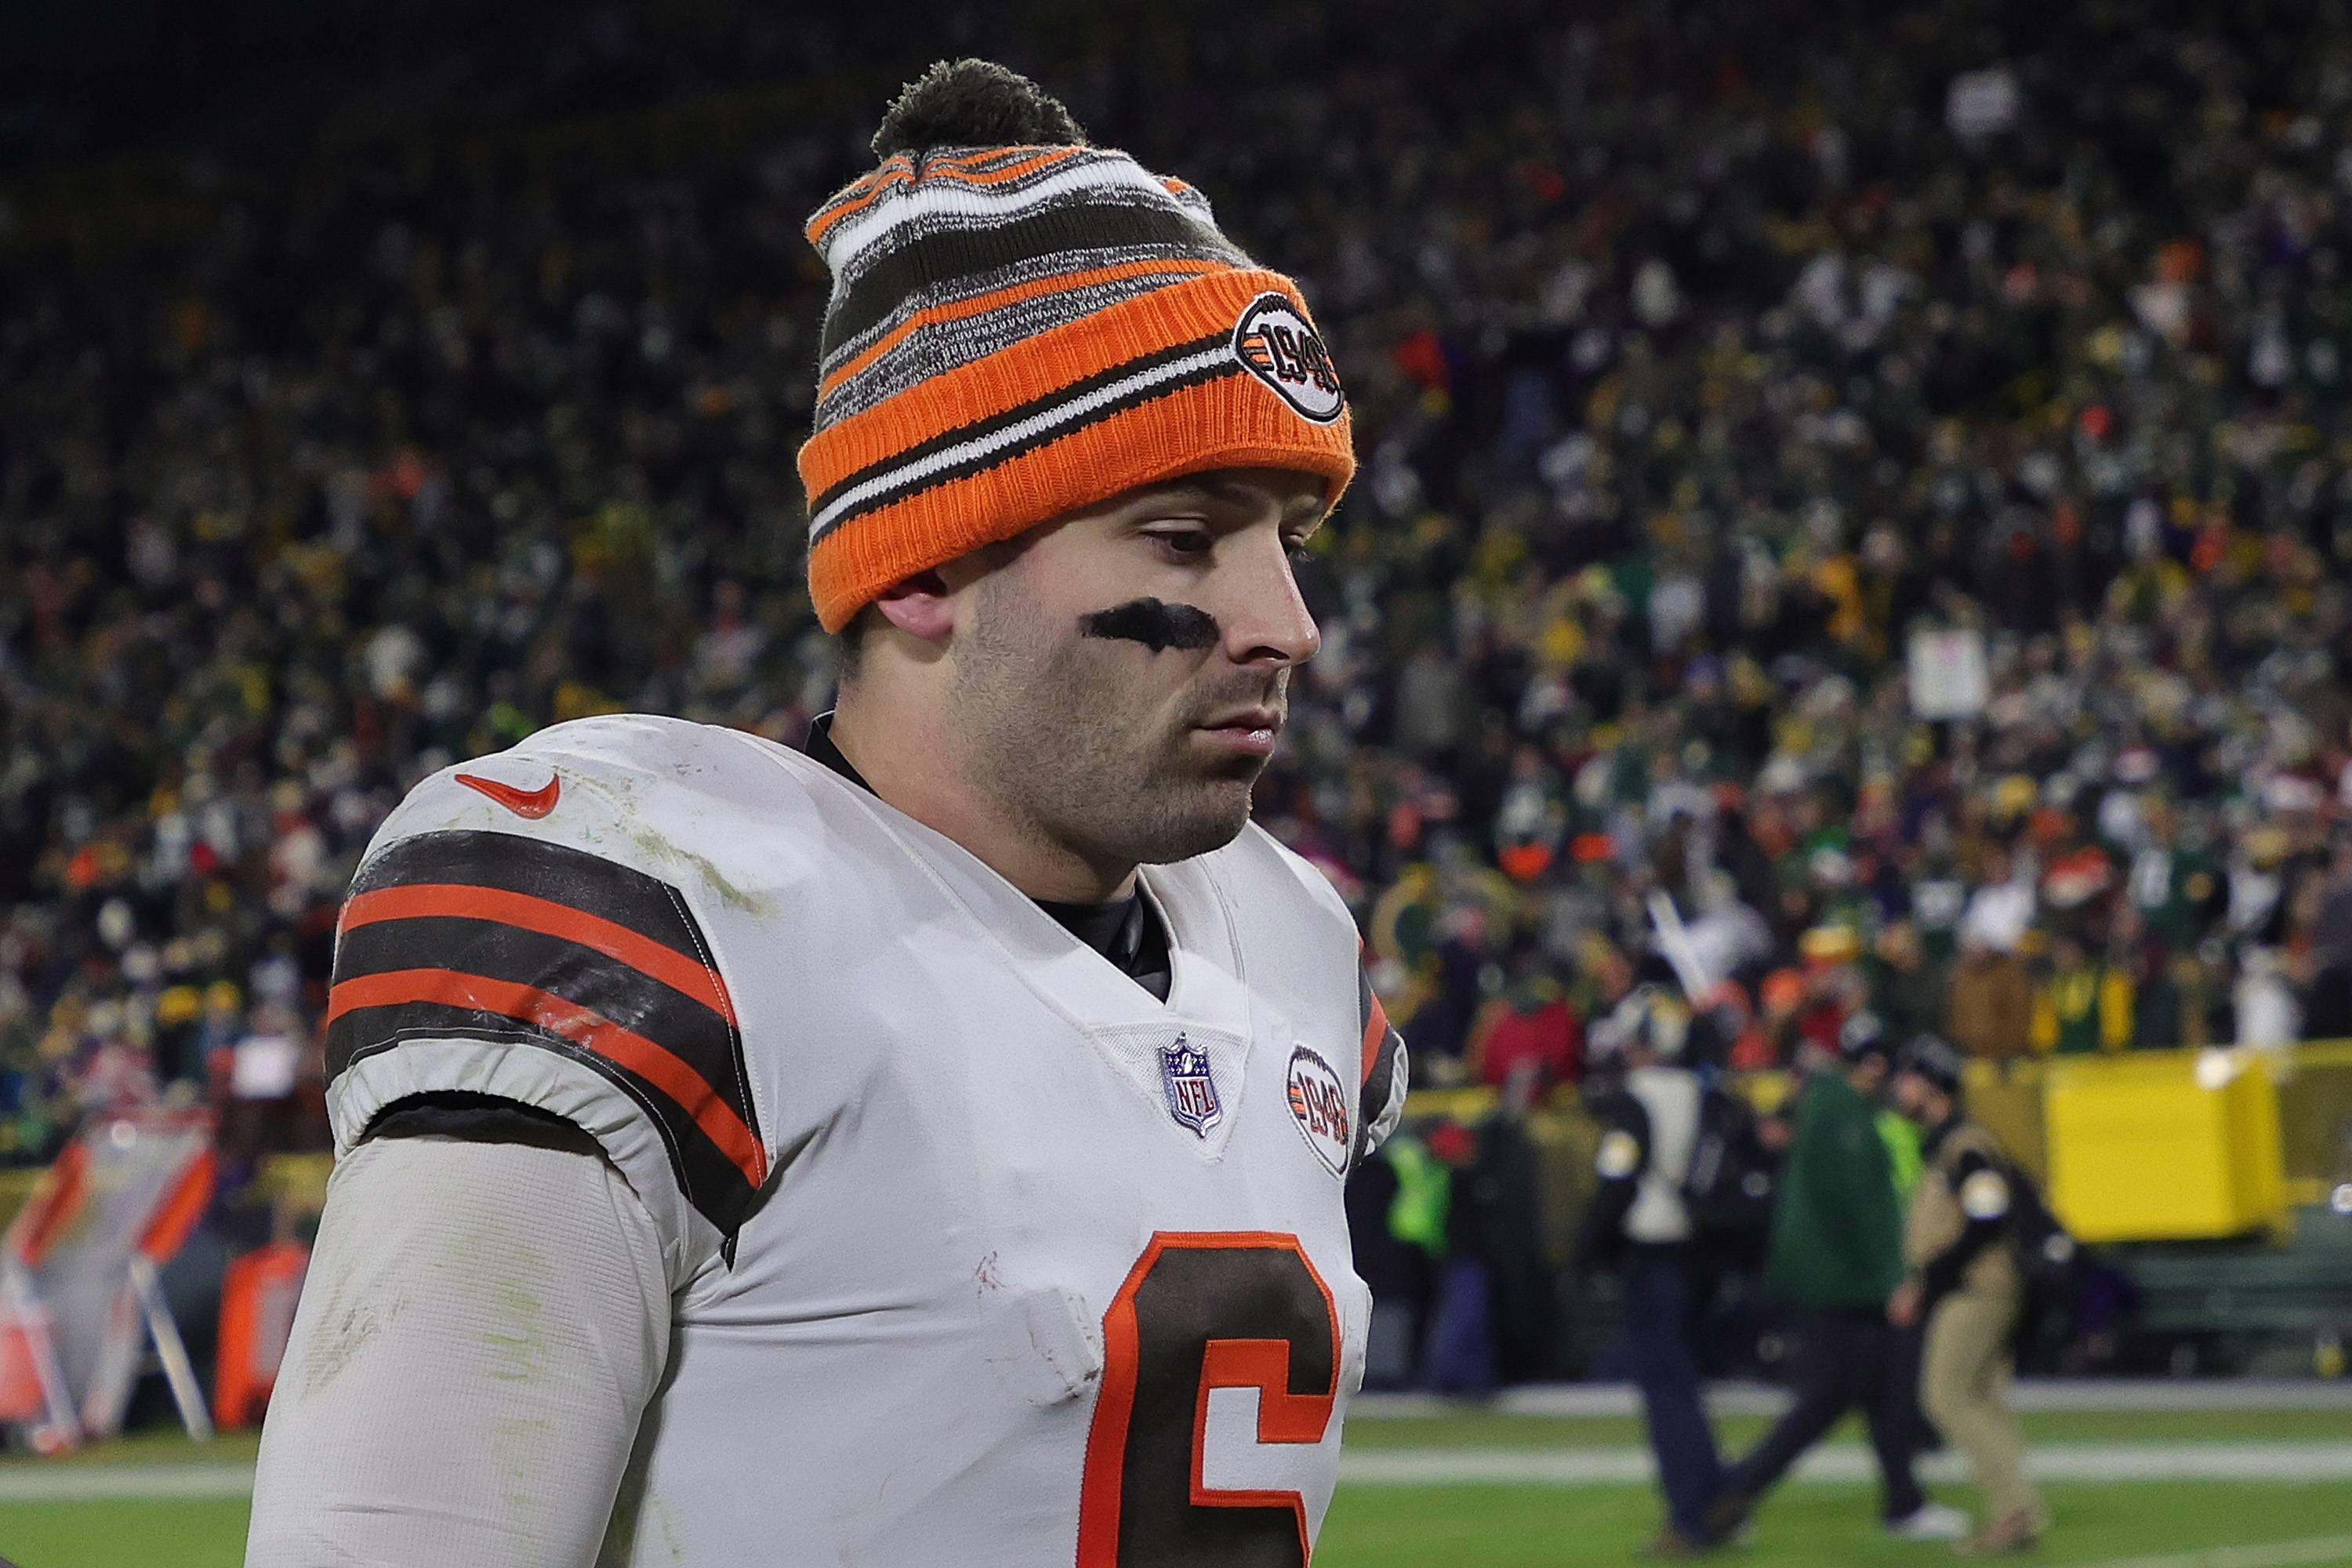 Cleveland Browns QB Baker Mayfield leaves field after loss to the Packers